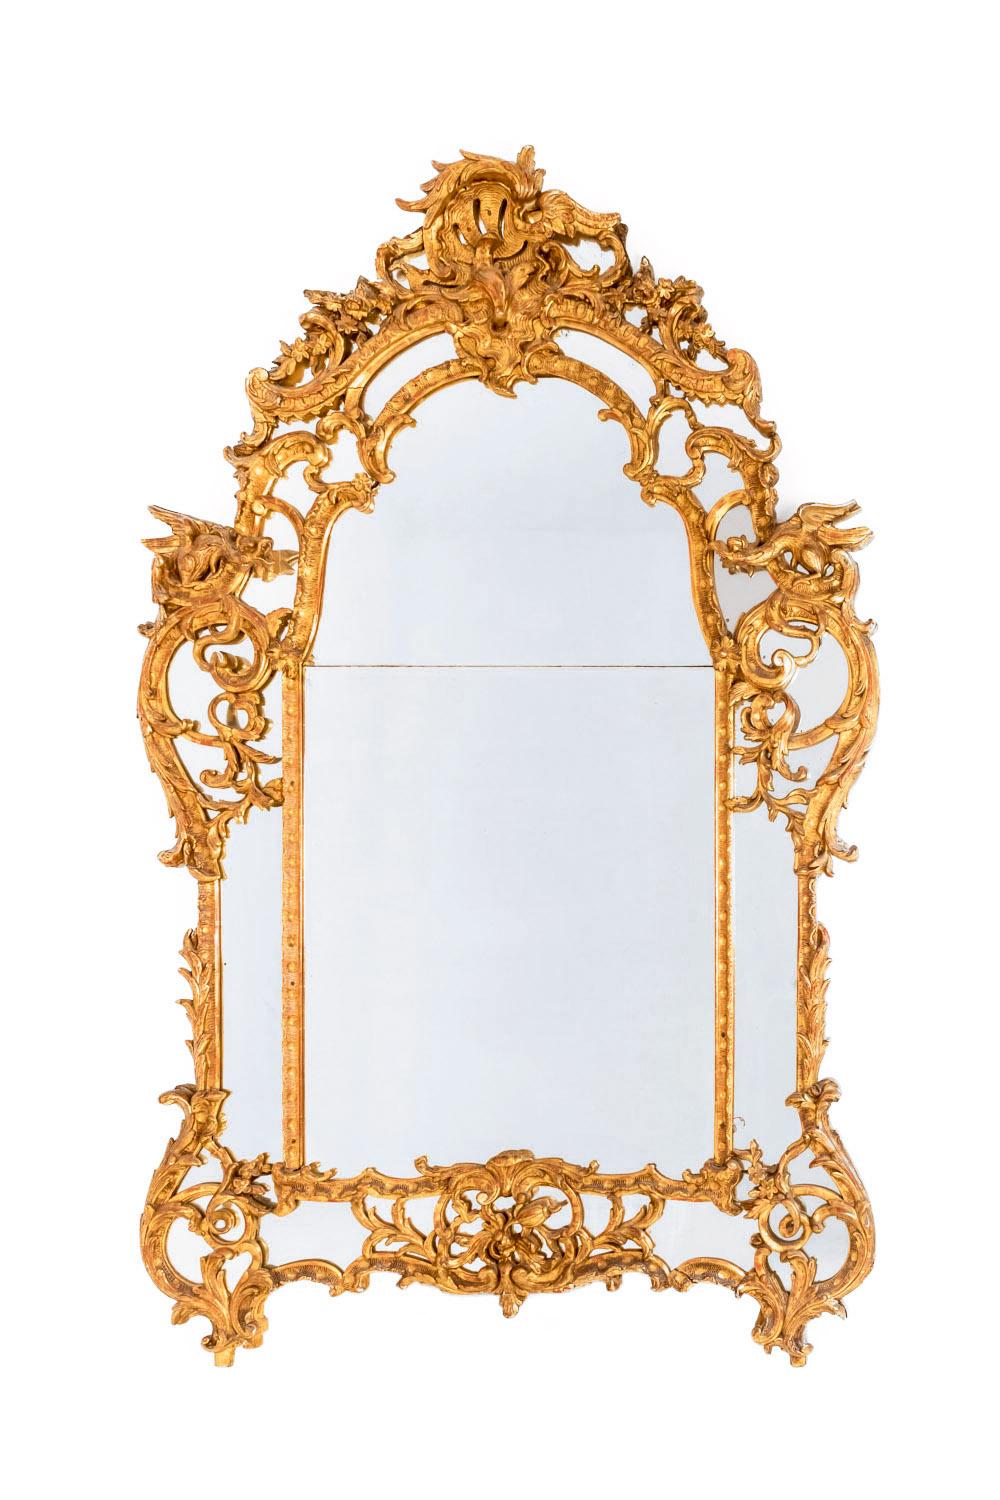 Large glazing beads French Regence style giltwood mirror. General rectangular shape with mirror glass edges in a chantourné shape standing on two short legs. Upper corners richly adorned with molding frames decorated in the Bérain style with two